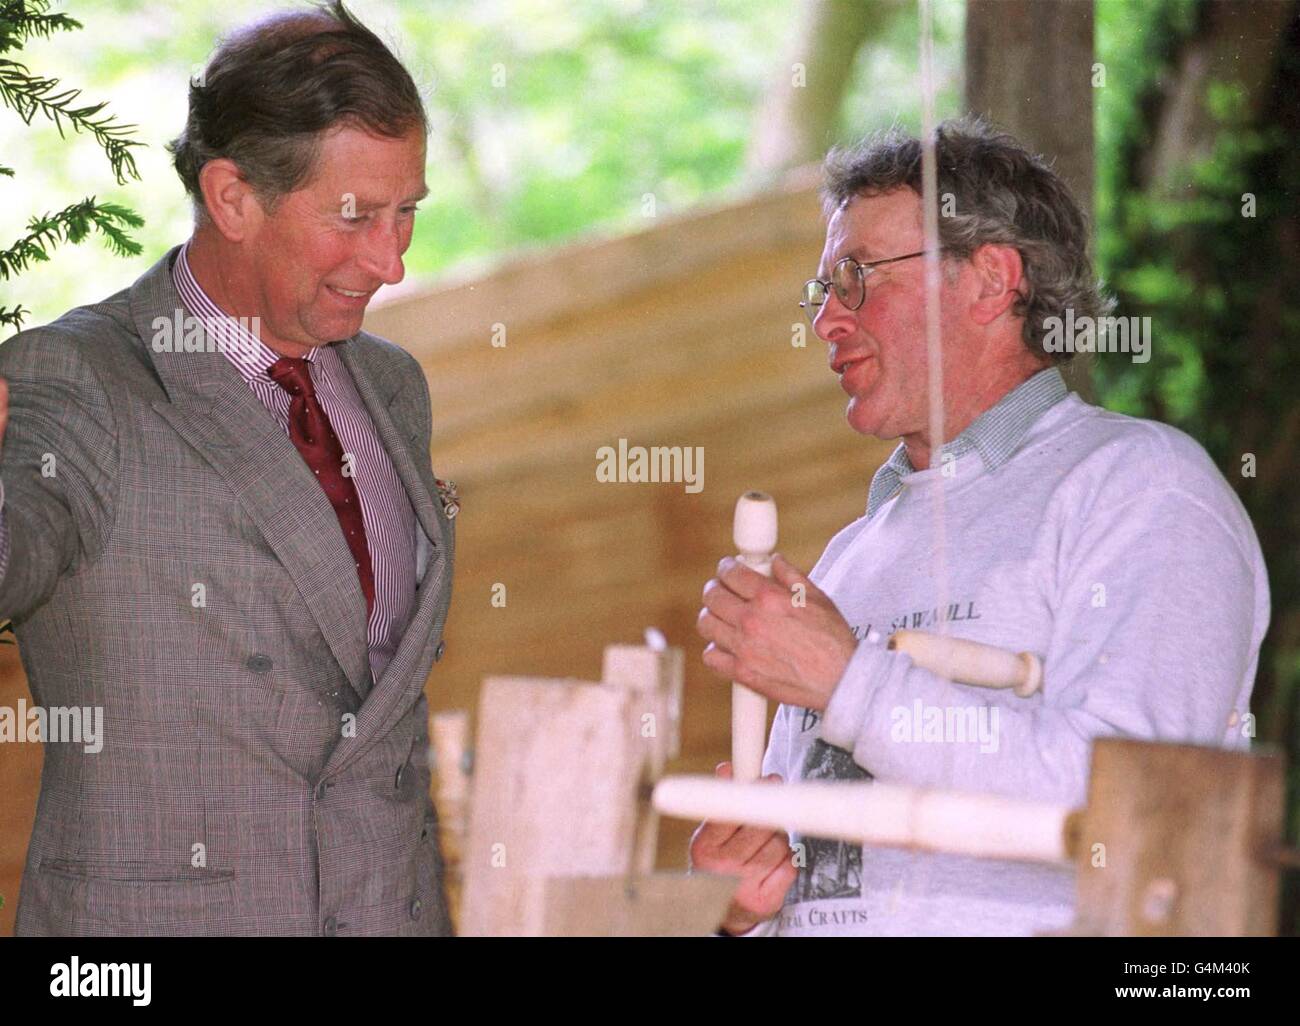 Prince of Wales is instructed in making a wooden spurtle, for stirring porridge, by Ken Grieve whilst on a visit to Woodschool Ltd in Ancrum, Roxburghshire, Scotland. * Woodschool is a working initiative aimed at demonstrating sustainable development through matching local hardwoods with furniture designers and makers. Stock Photo